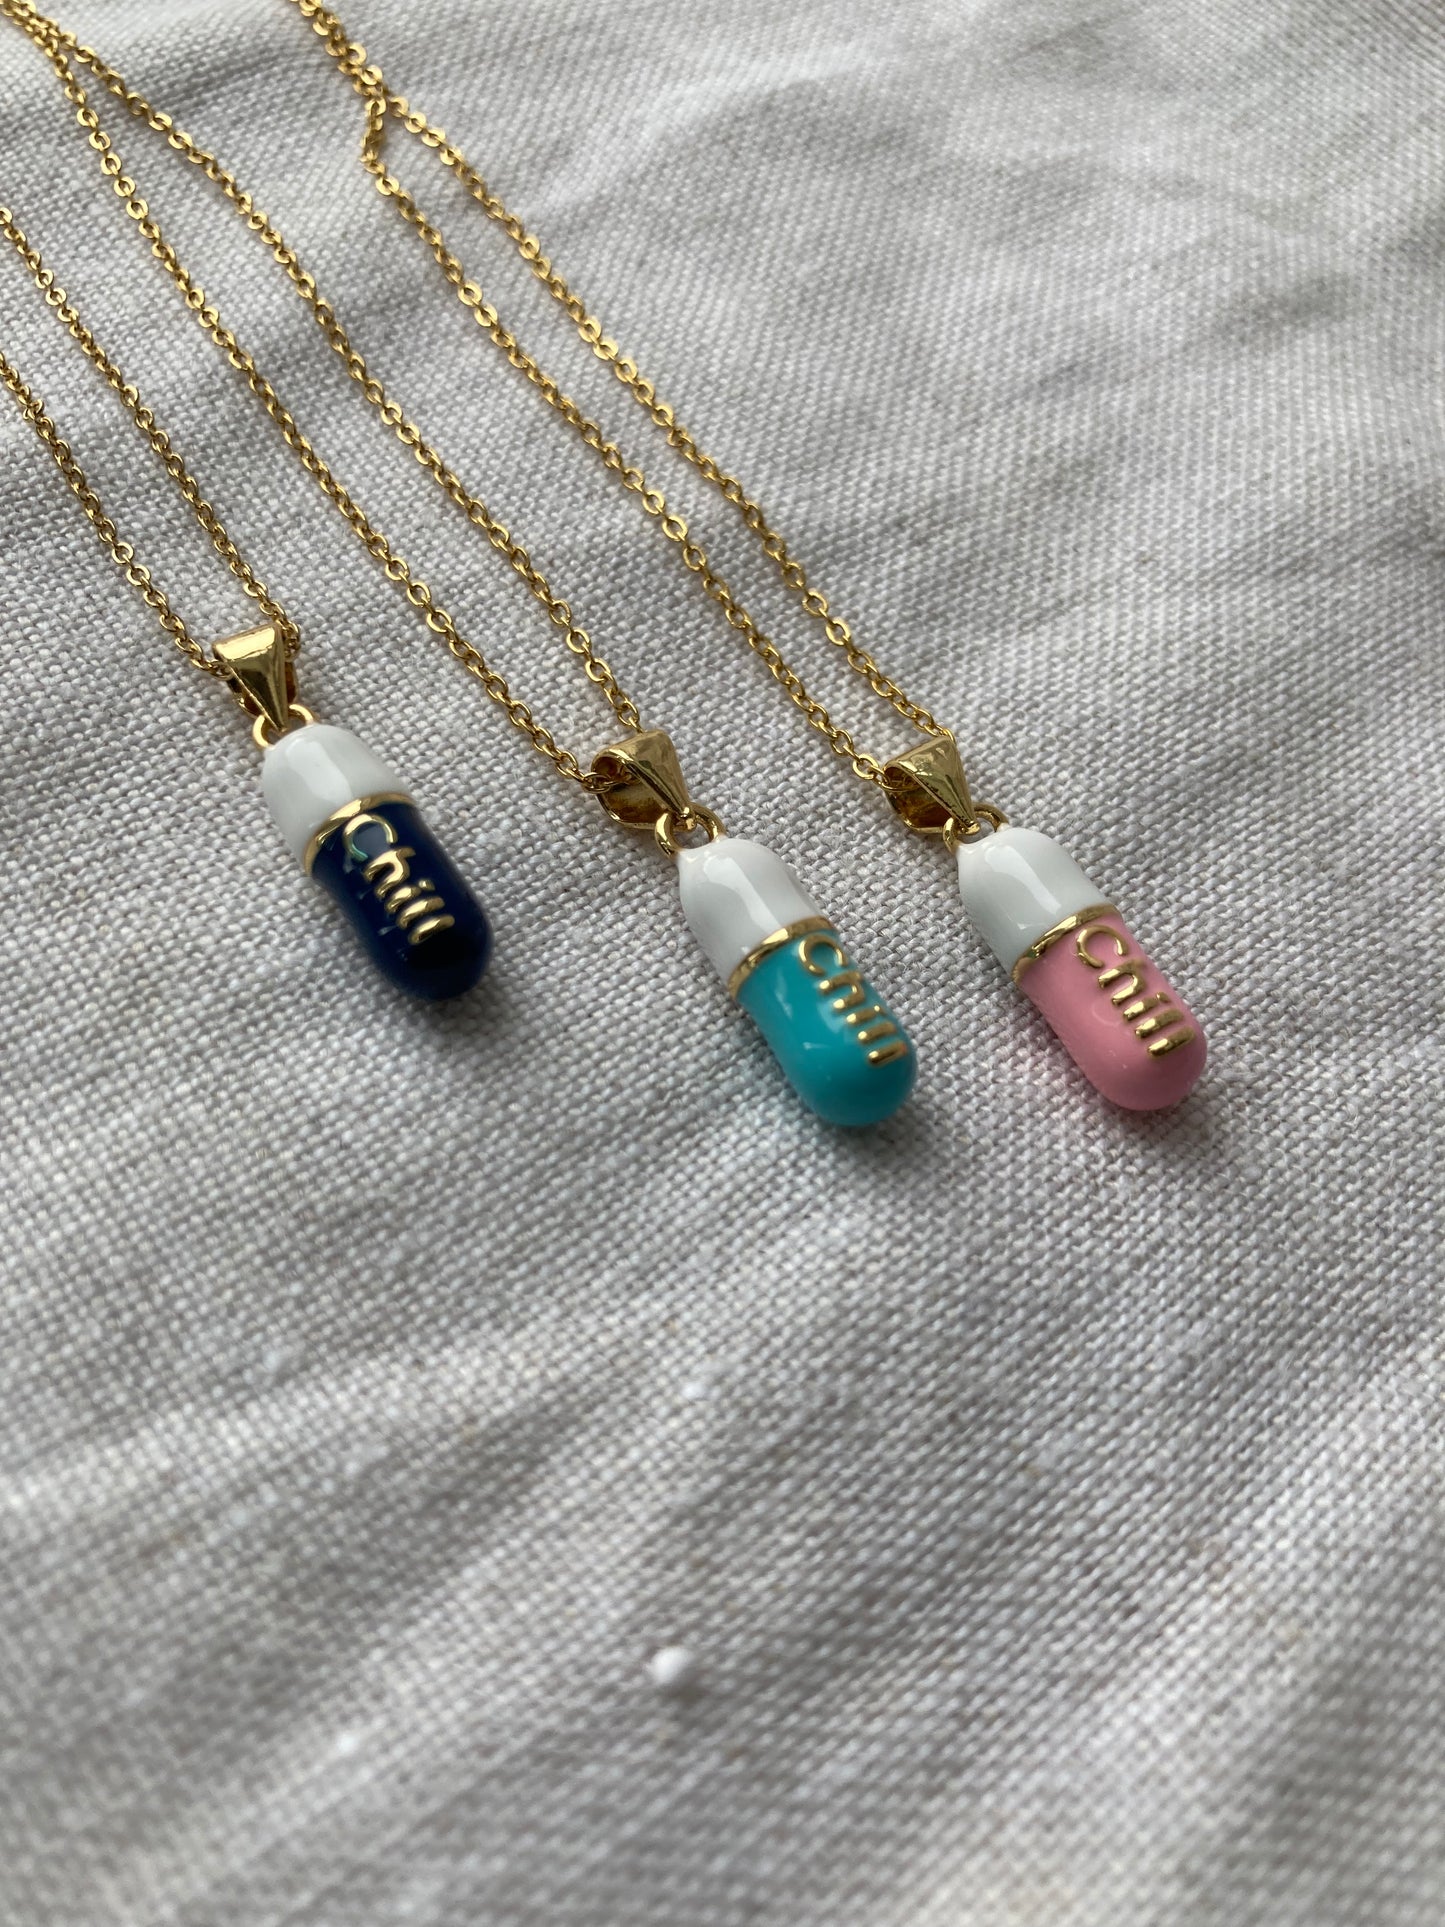 Chill Capsule Necklace - Blue-Dark Blue-Pink